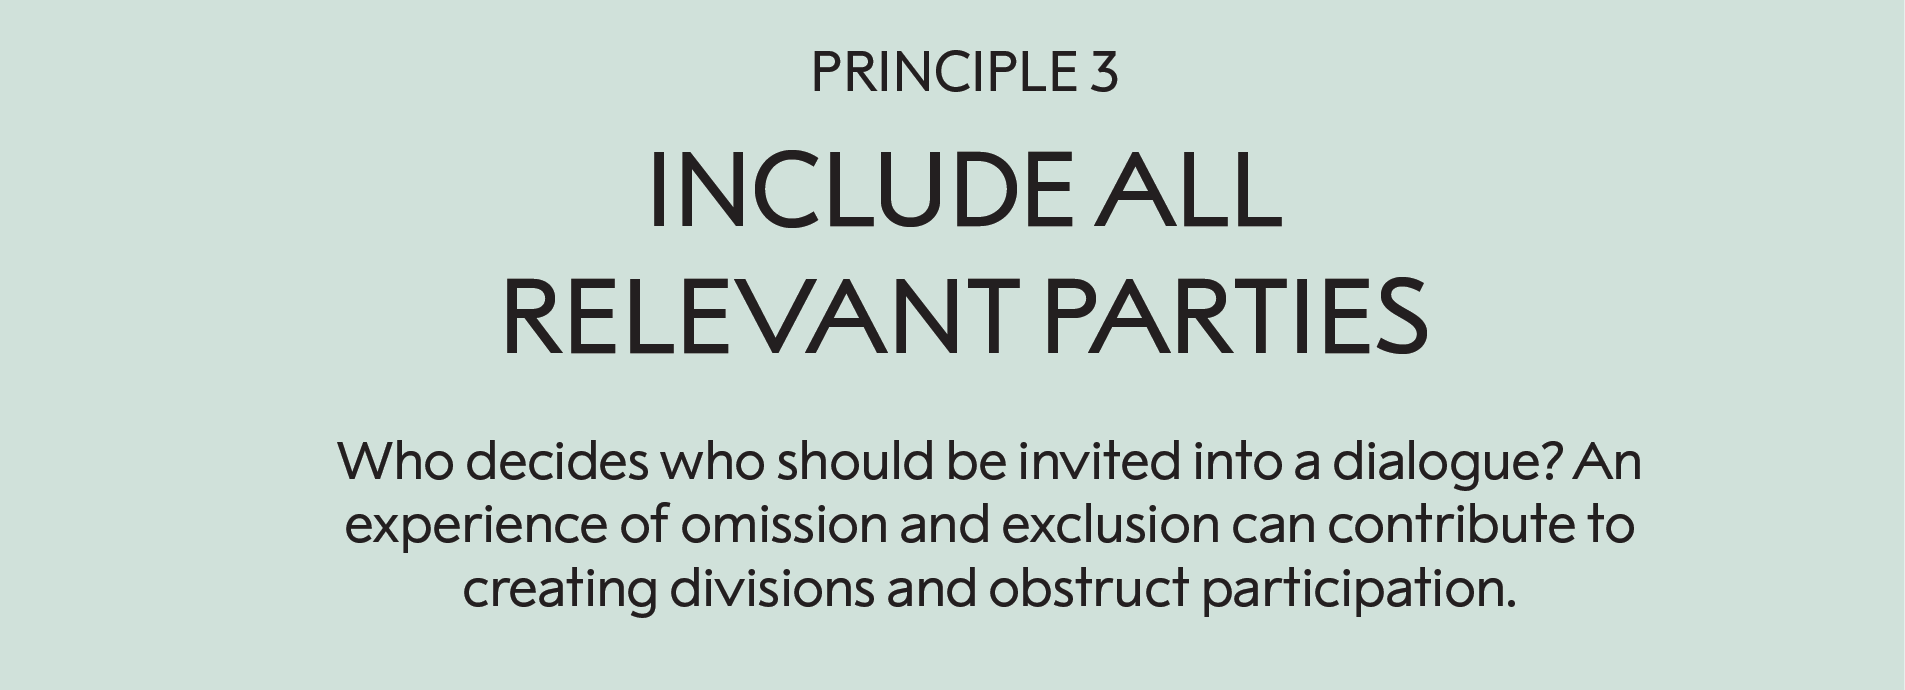 Principle 3: Include all relevant parties :     Who decides who should be invited into a dialogue? An experience of omission and exclusion can contribute to creating divisions and obstruct participation. 